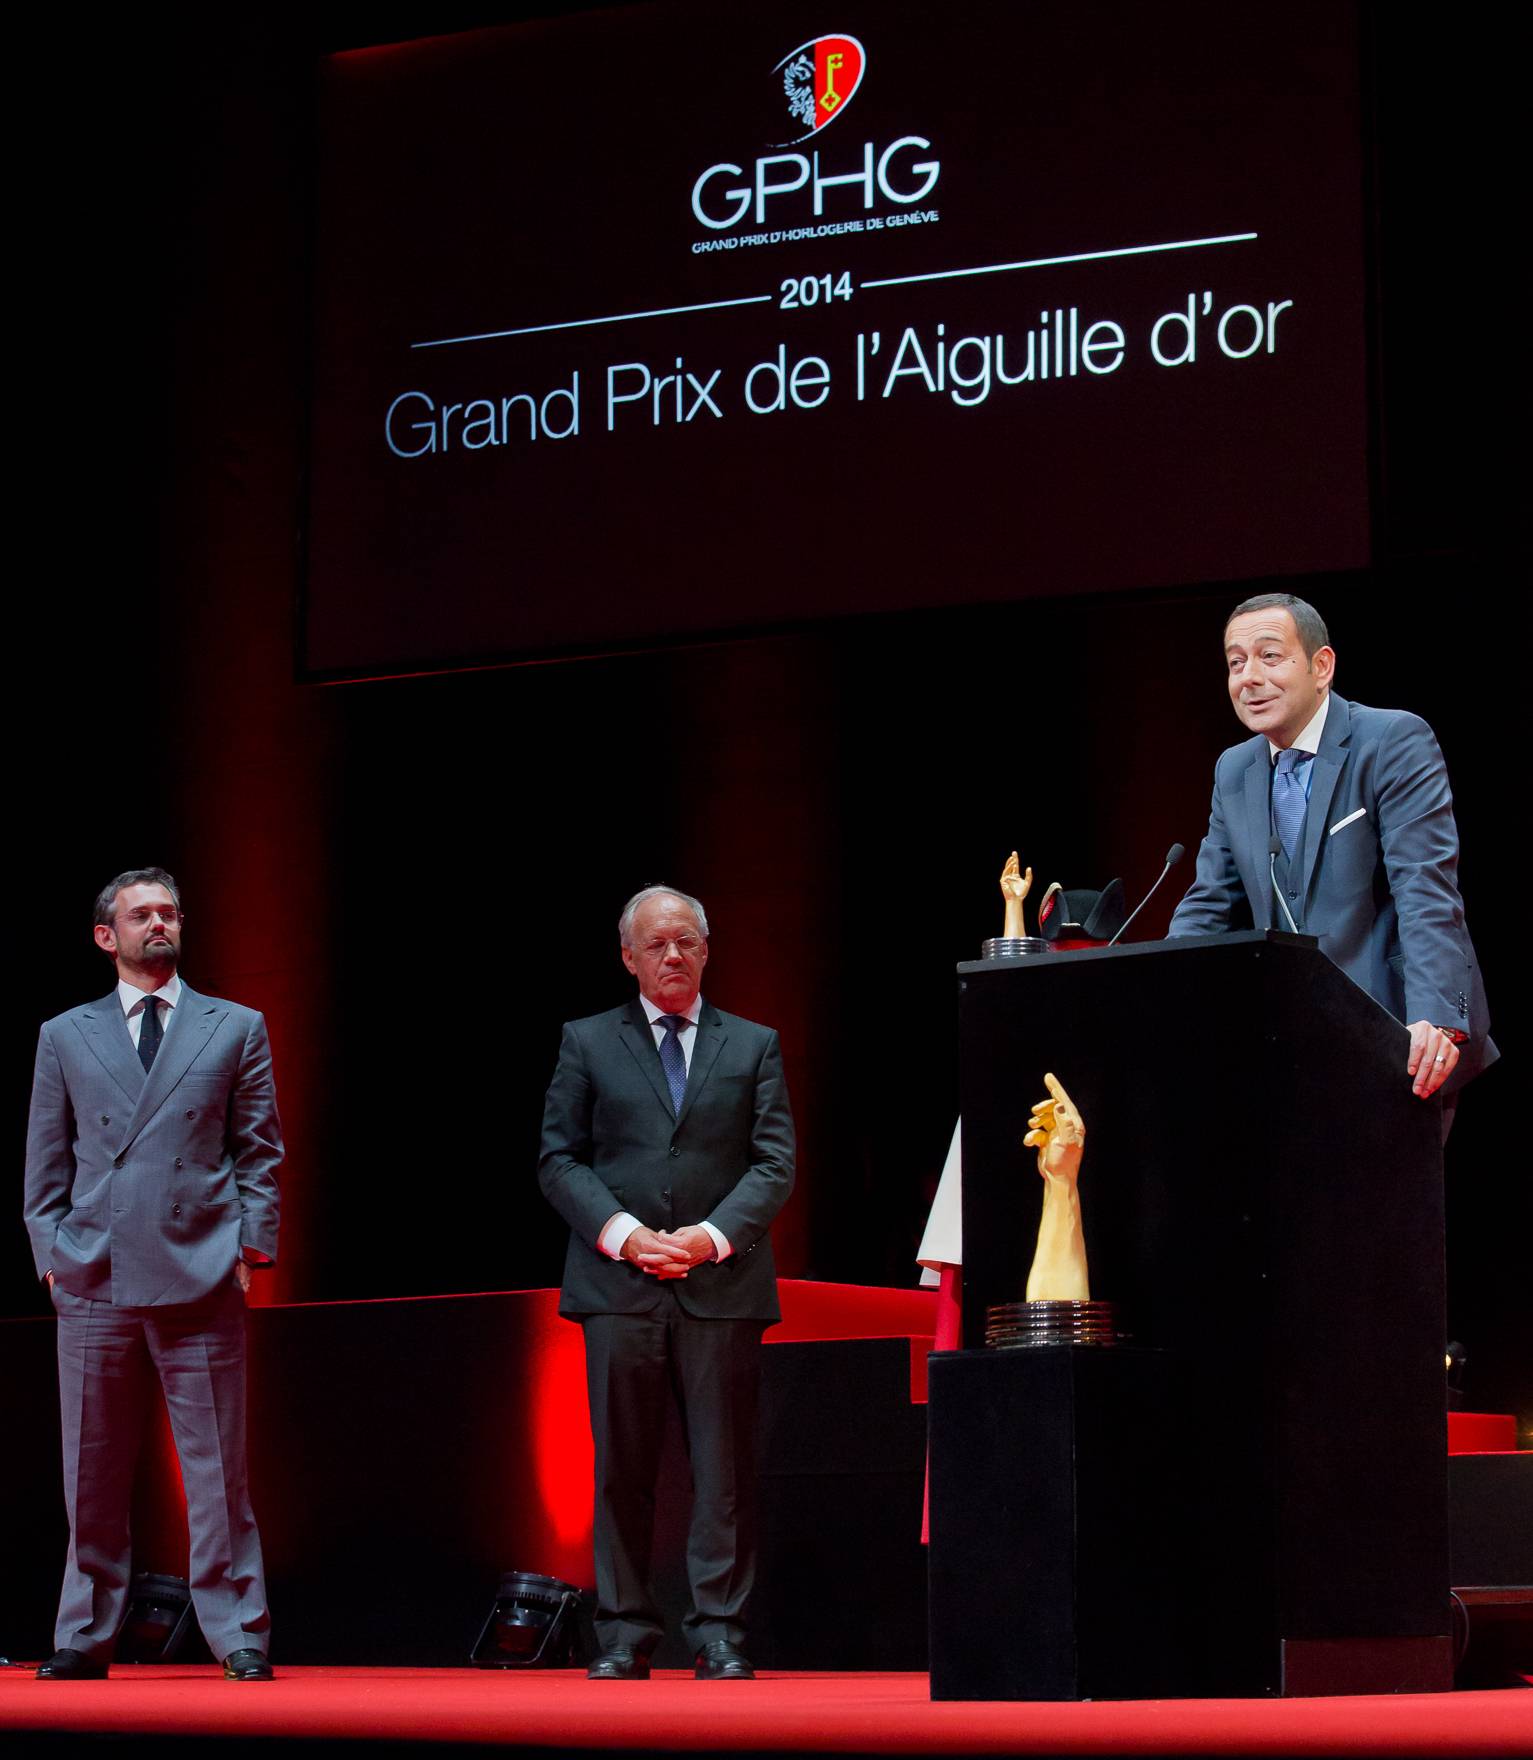 Stefano Macaluso (jury member and Product director of Girard-Perregaux), Johann Schneider-Ammann (Federal councillor) and Jean-Charles Zufferey (Vice-president of Breguet, winner of the « Aiguille d’Or » Grand Prix 2014)